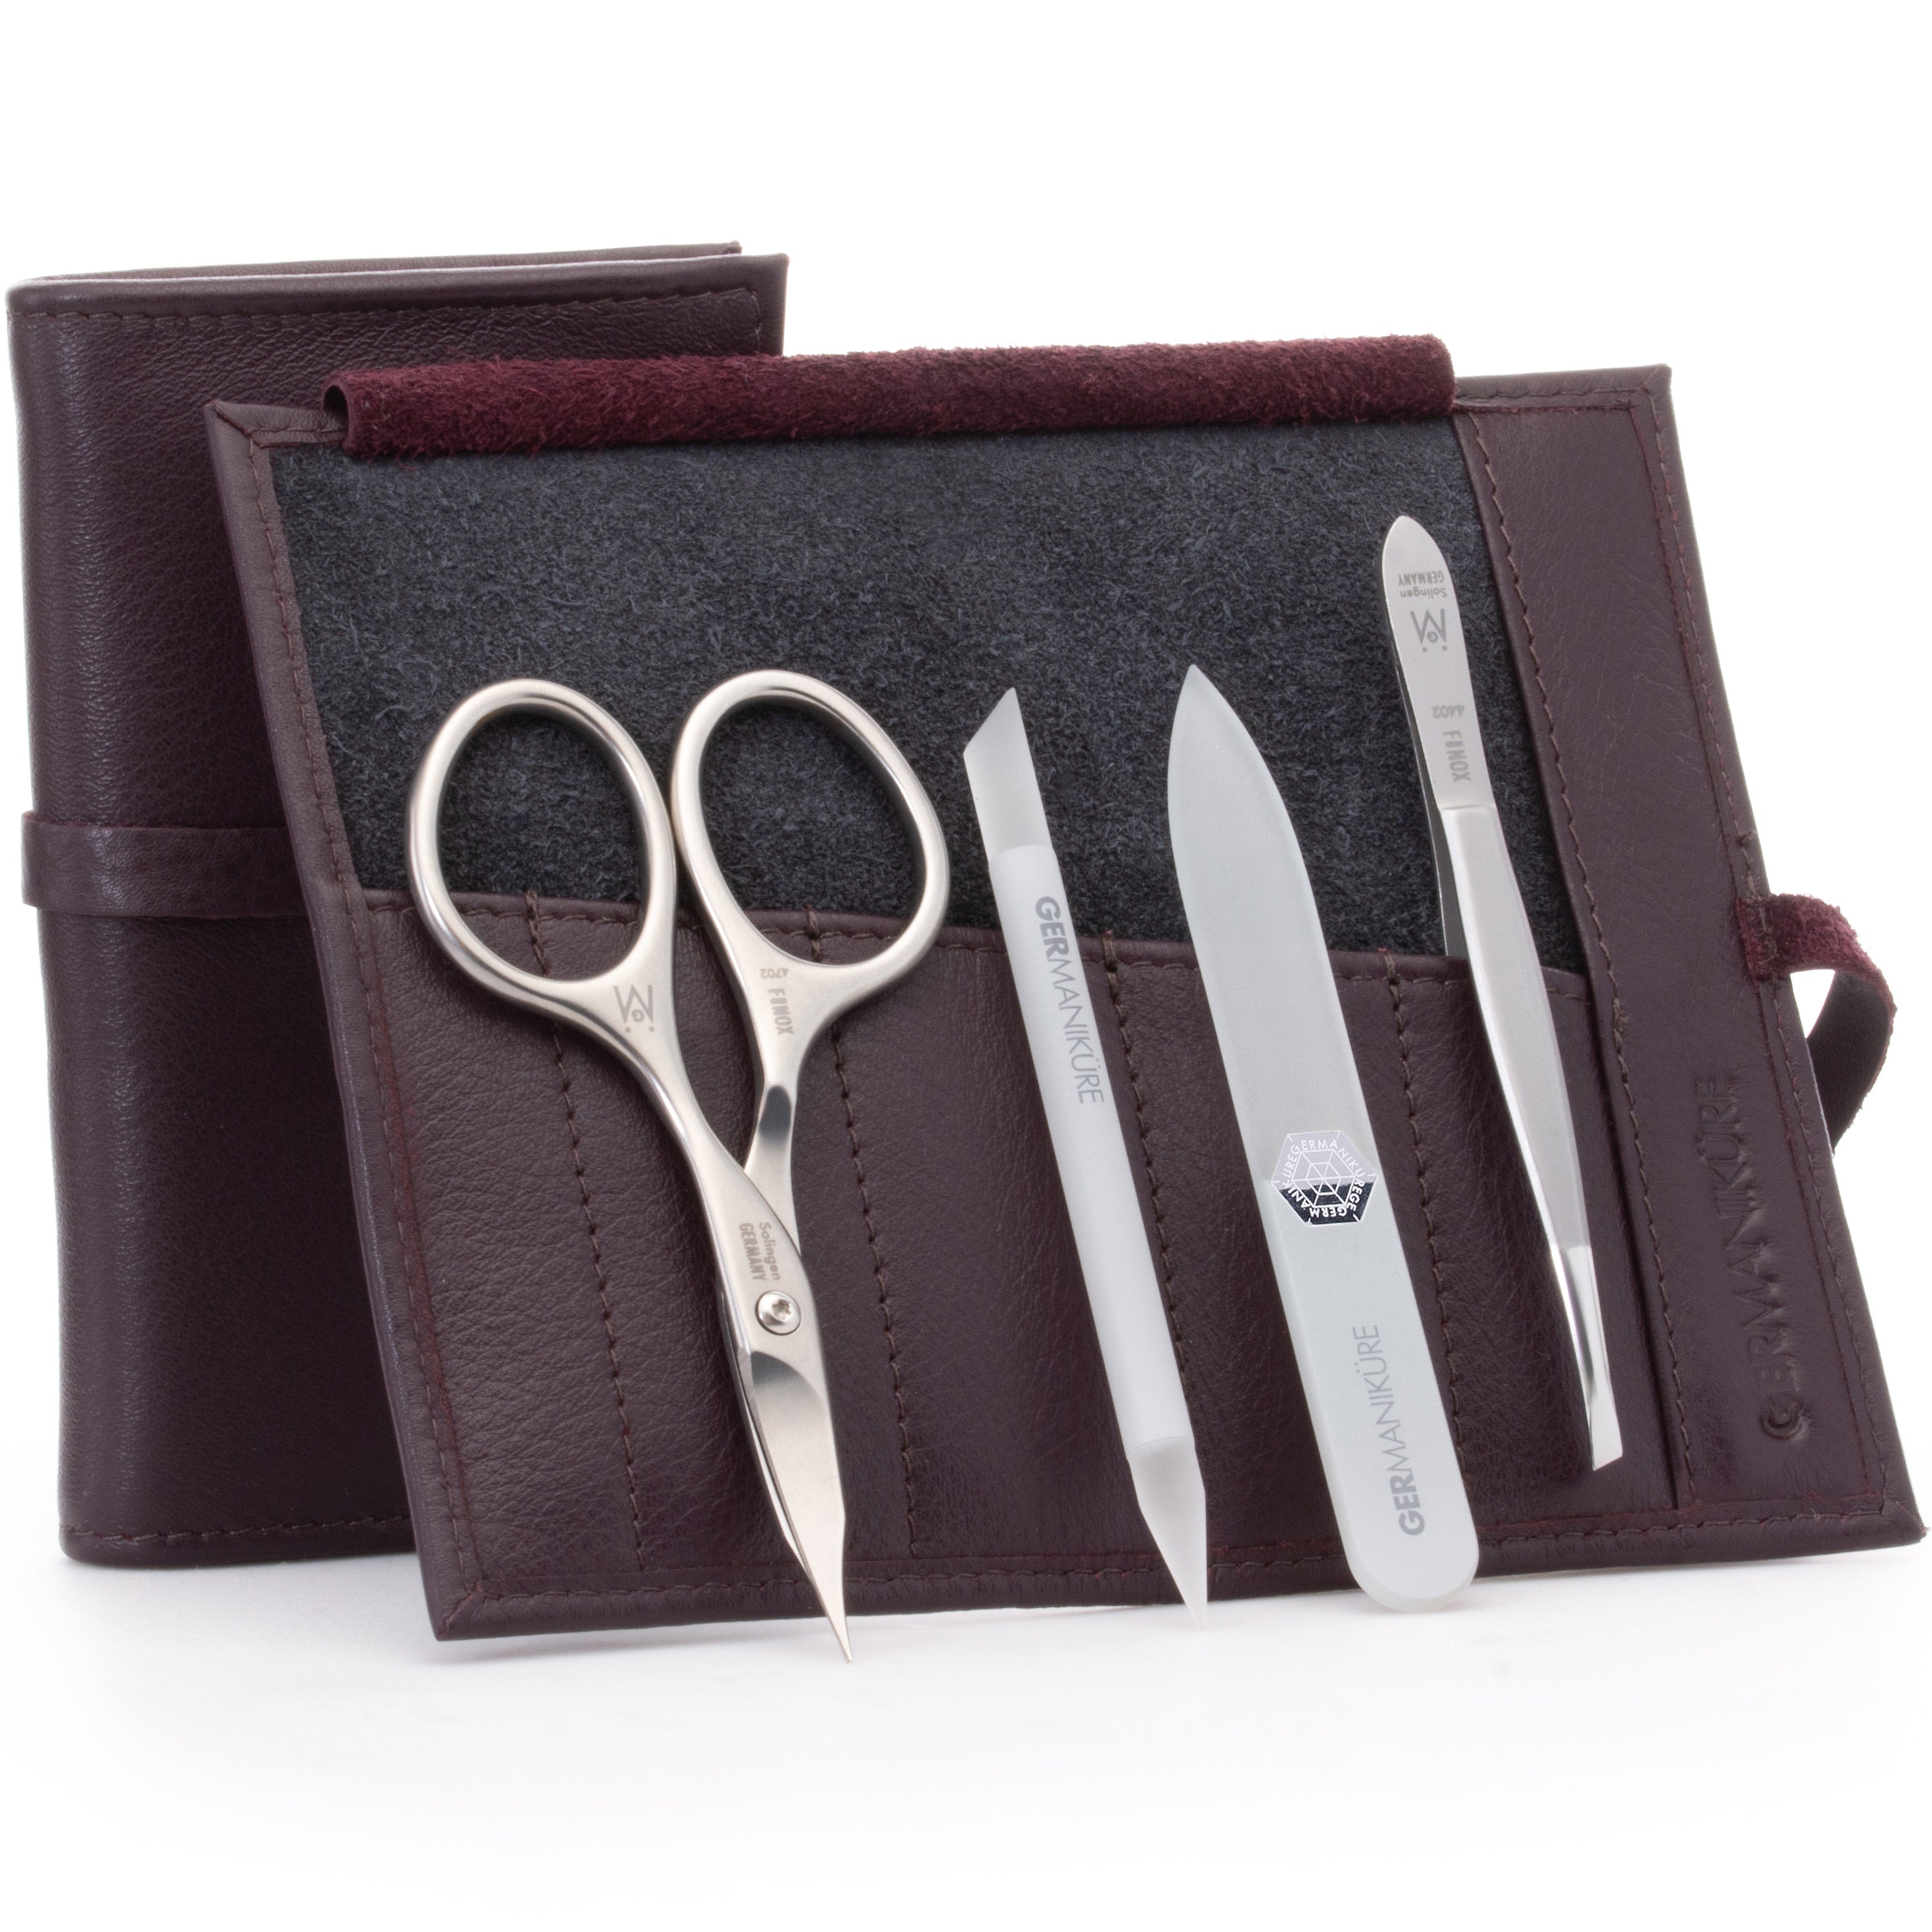 Majestique Manicure Pedicure Tool Kit (PACK OF 7) Travel Manicure Grooming  Kit